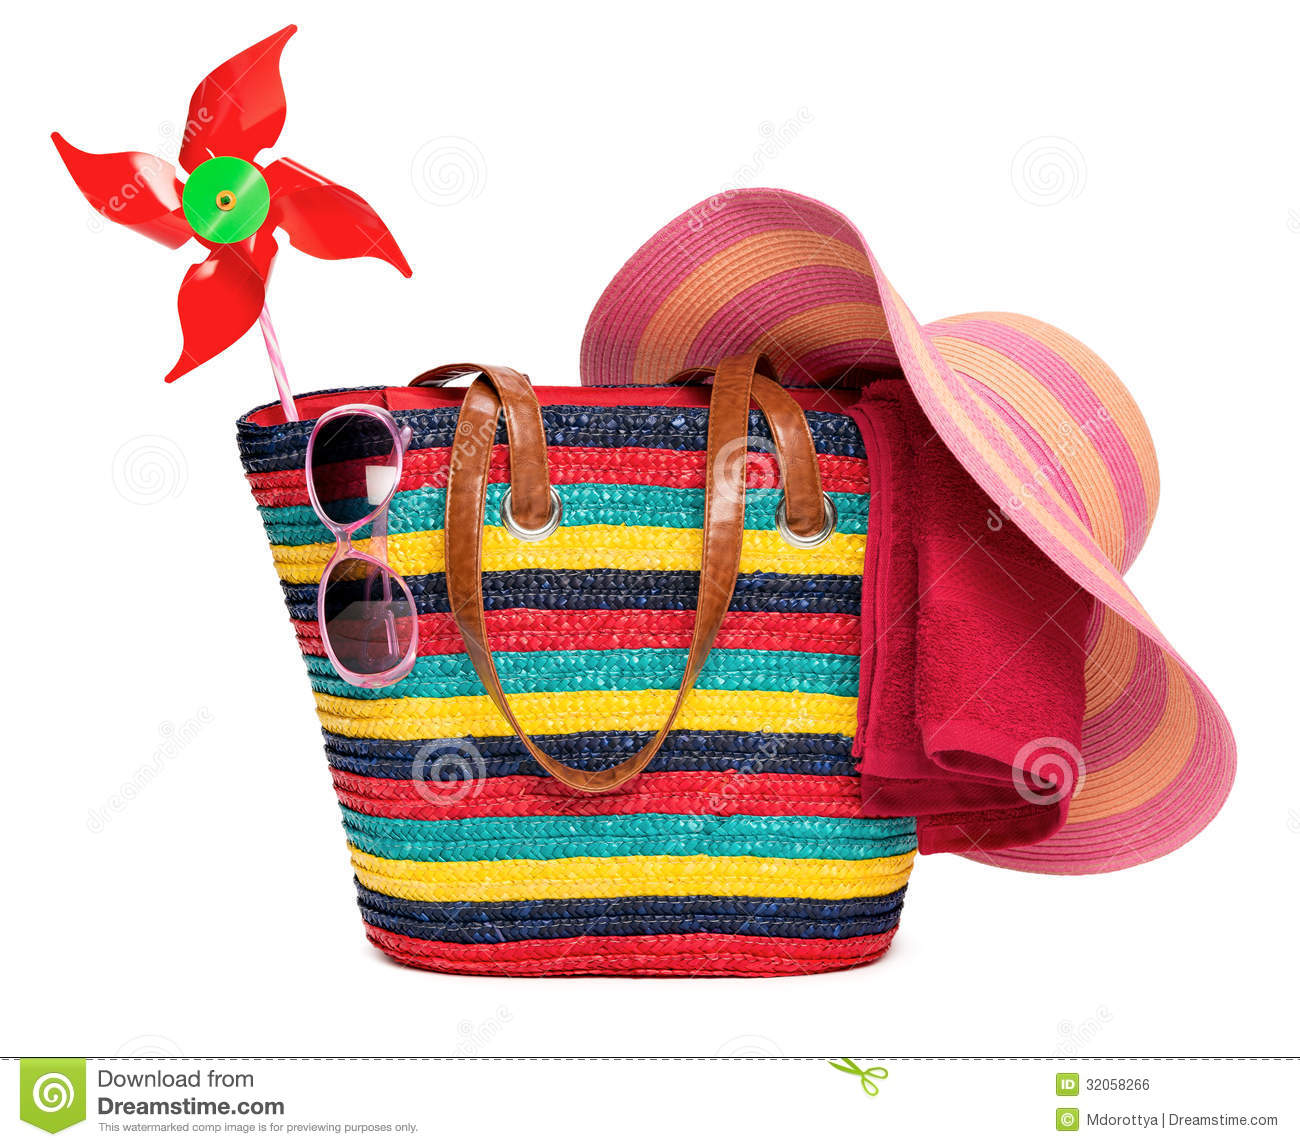 Colorful Striped Beach Bag With A Straw Hat Towel Sunglasses And A